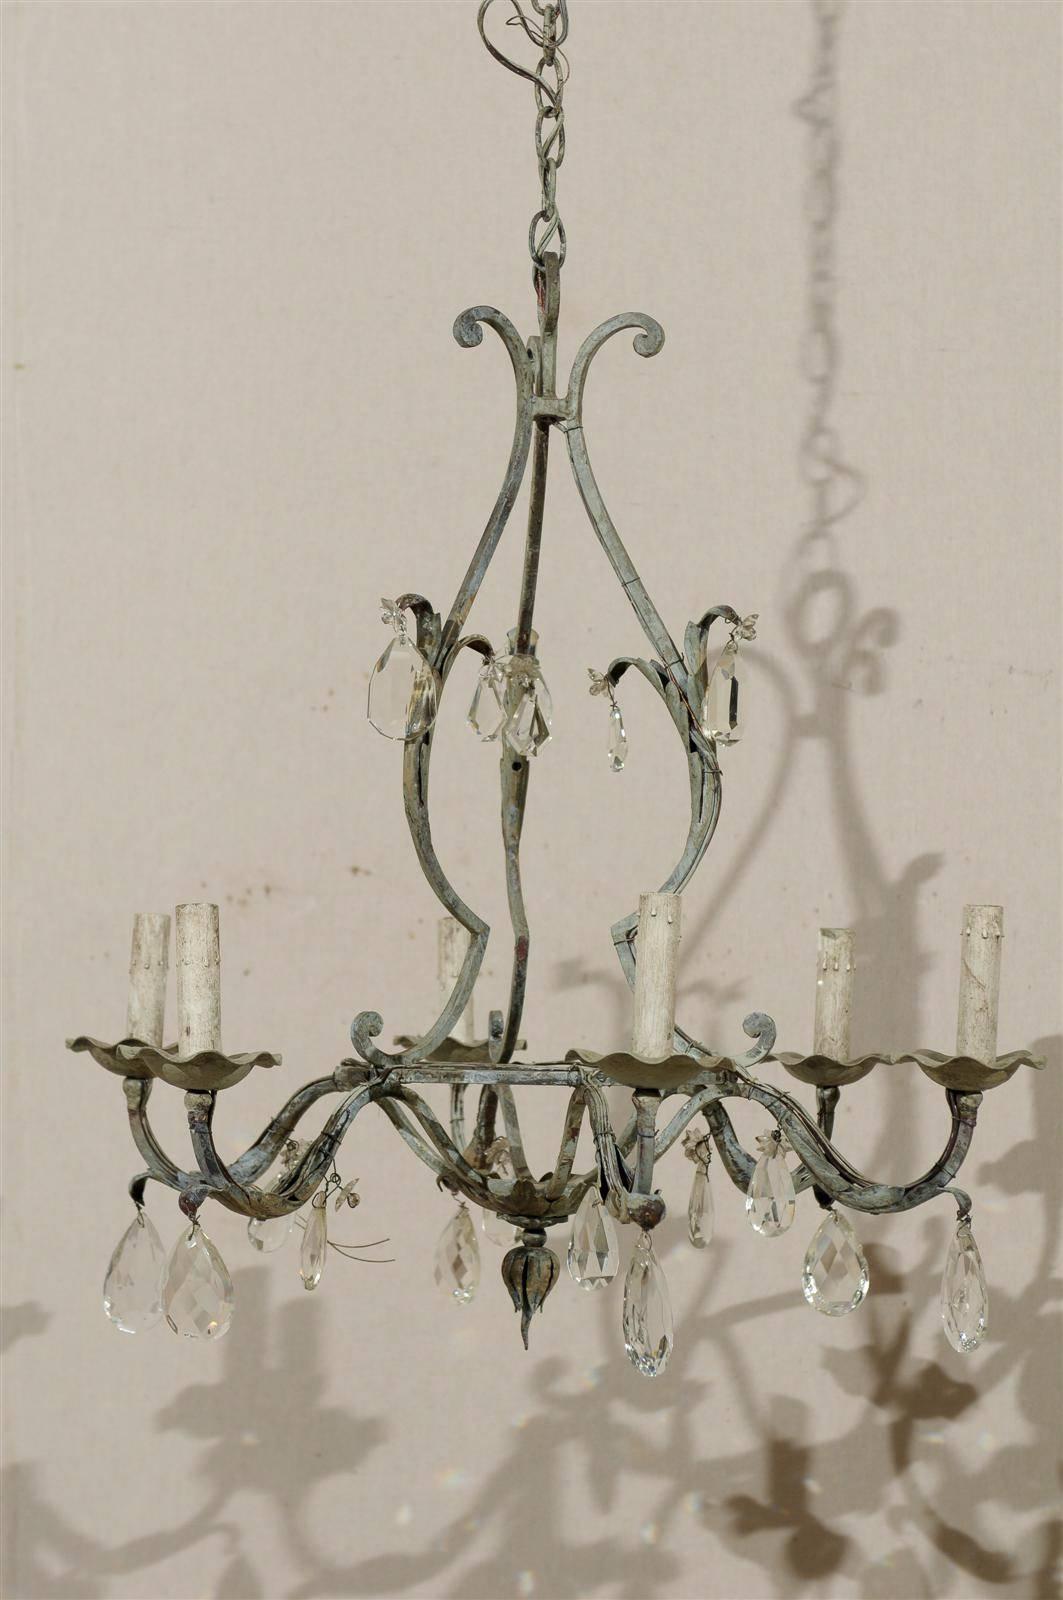 20th Century A Pair of French Painted Iron and Crystal Six-Light Chandeliers with Leaf Motifs